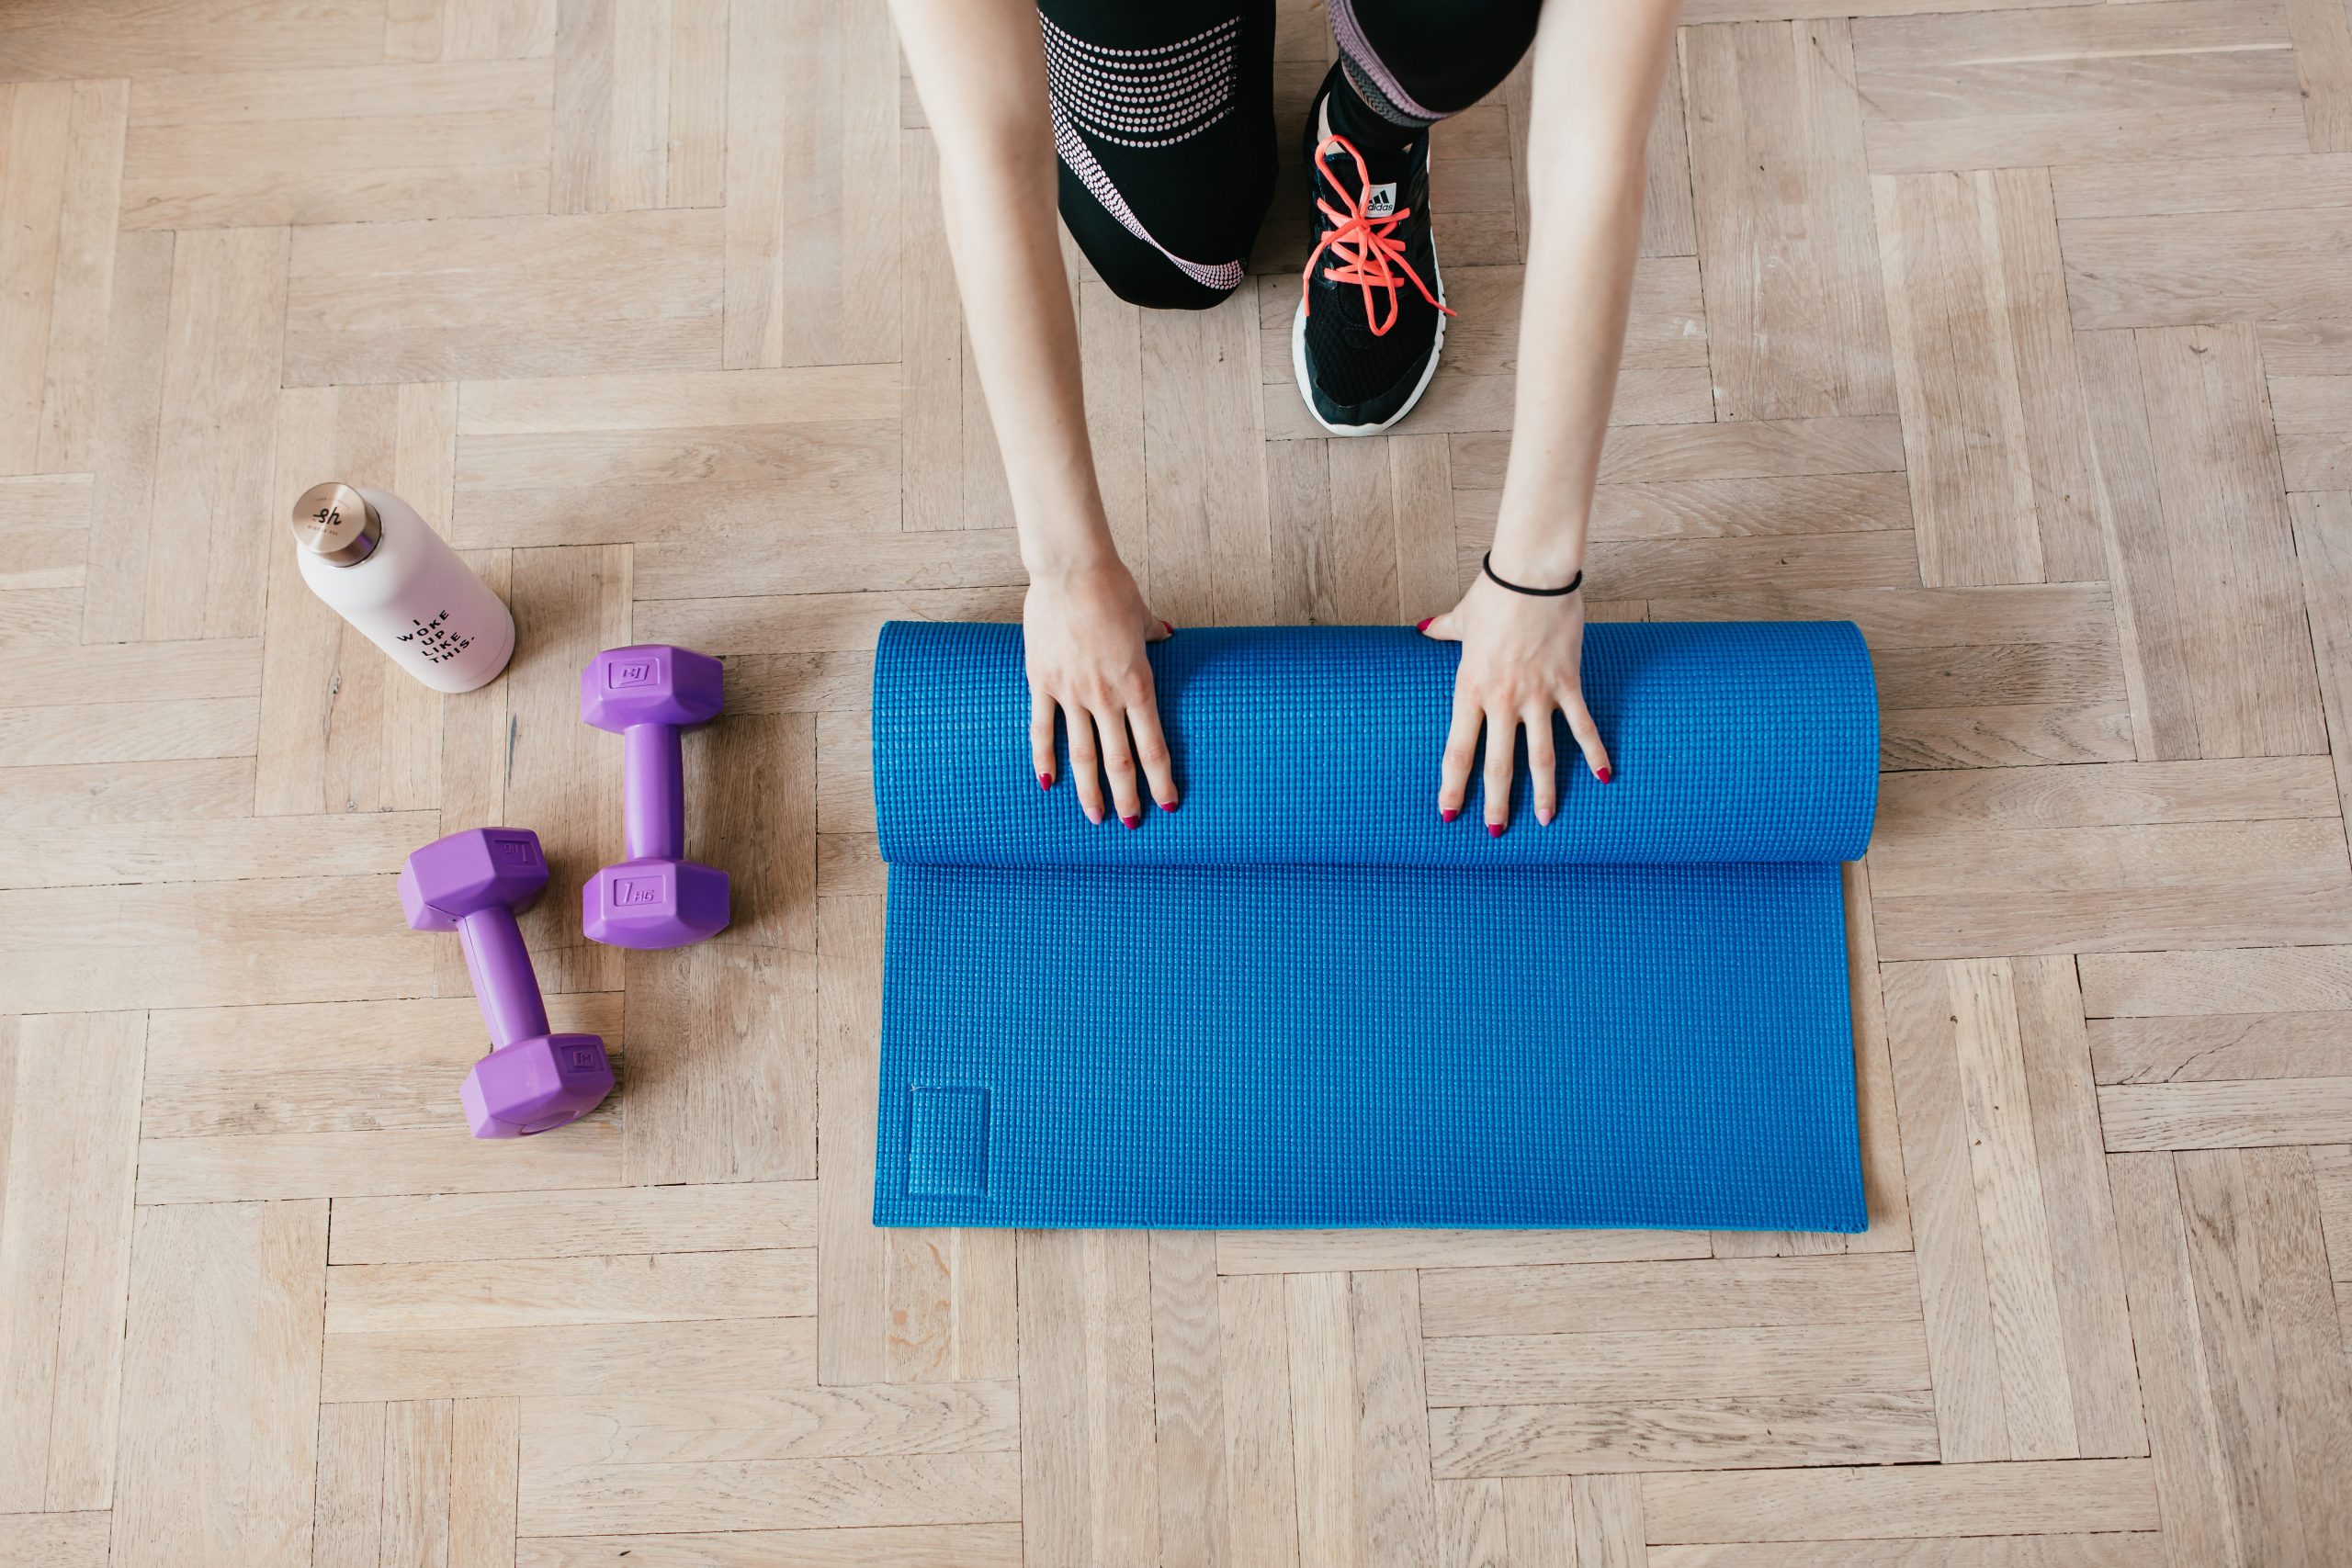 7 Best At Home Workout Plans You Shouldn’t Miss!